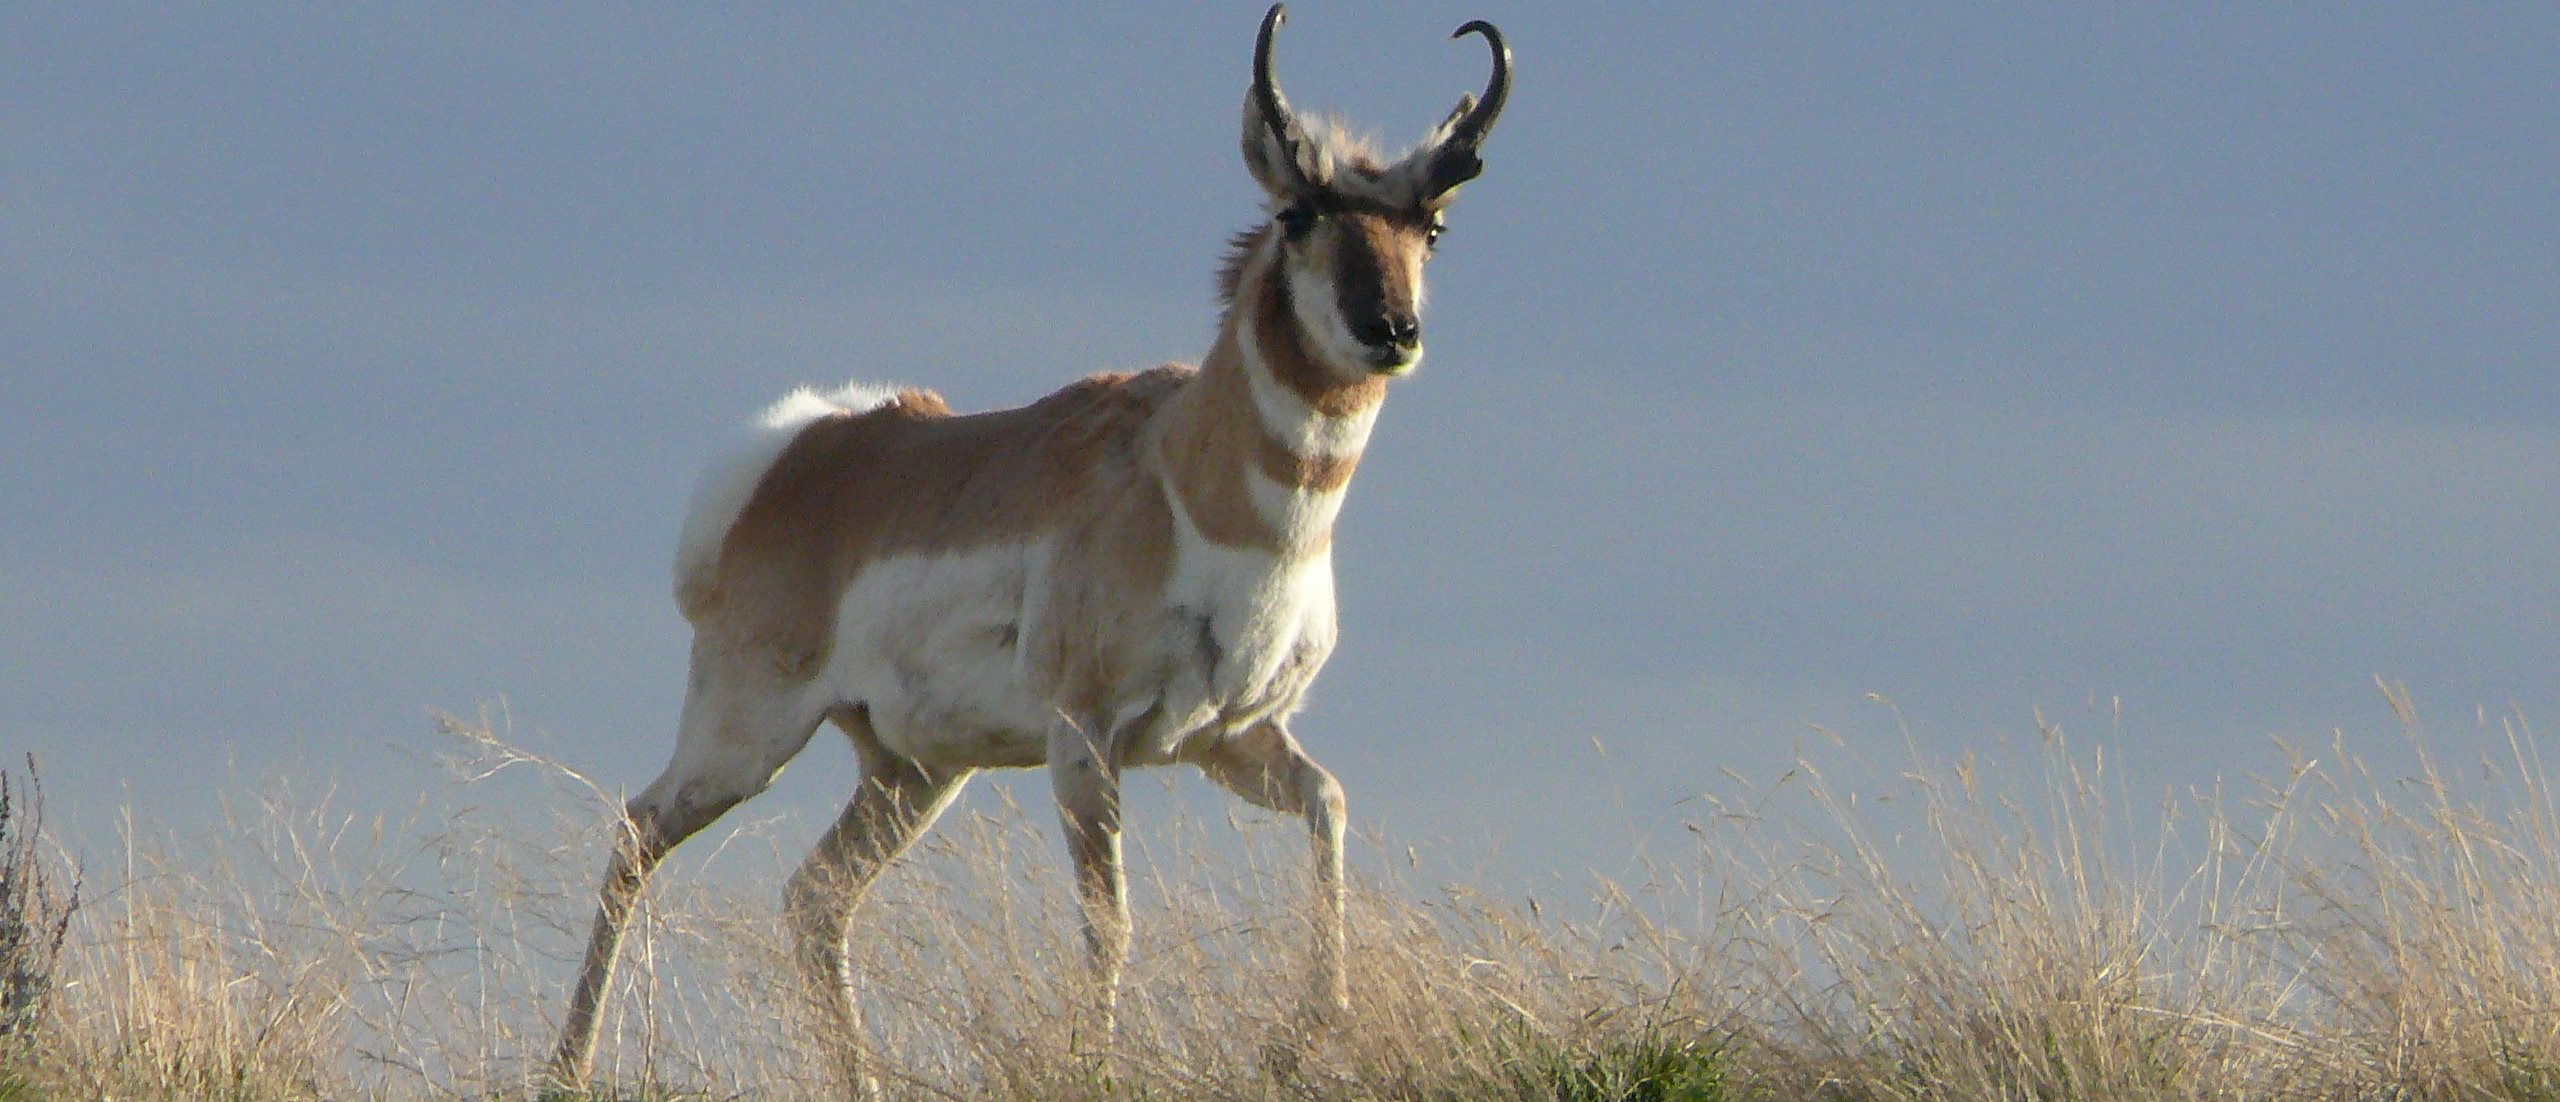 Pronghorn migration across borders and human-made landscapes